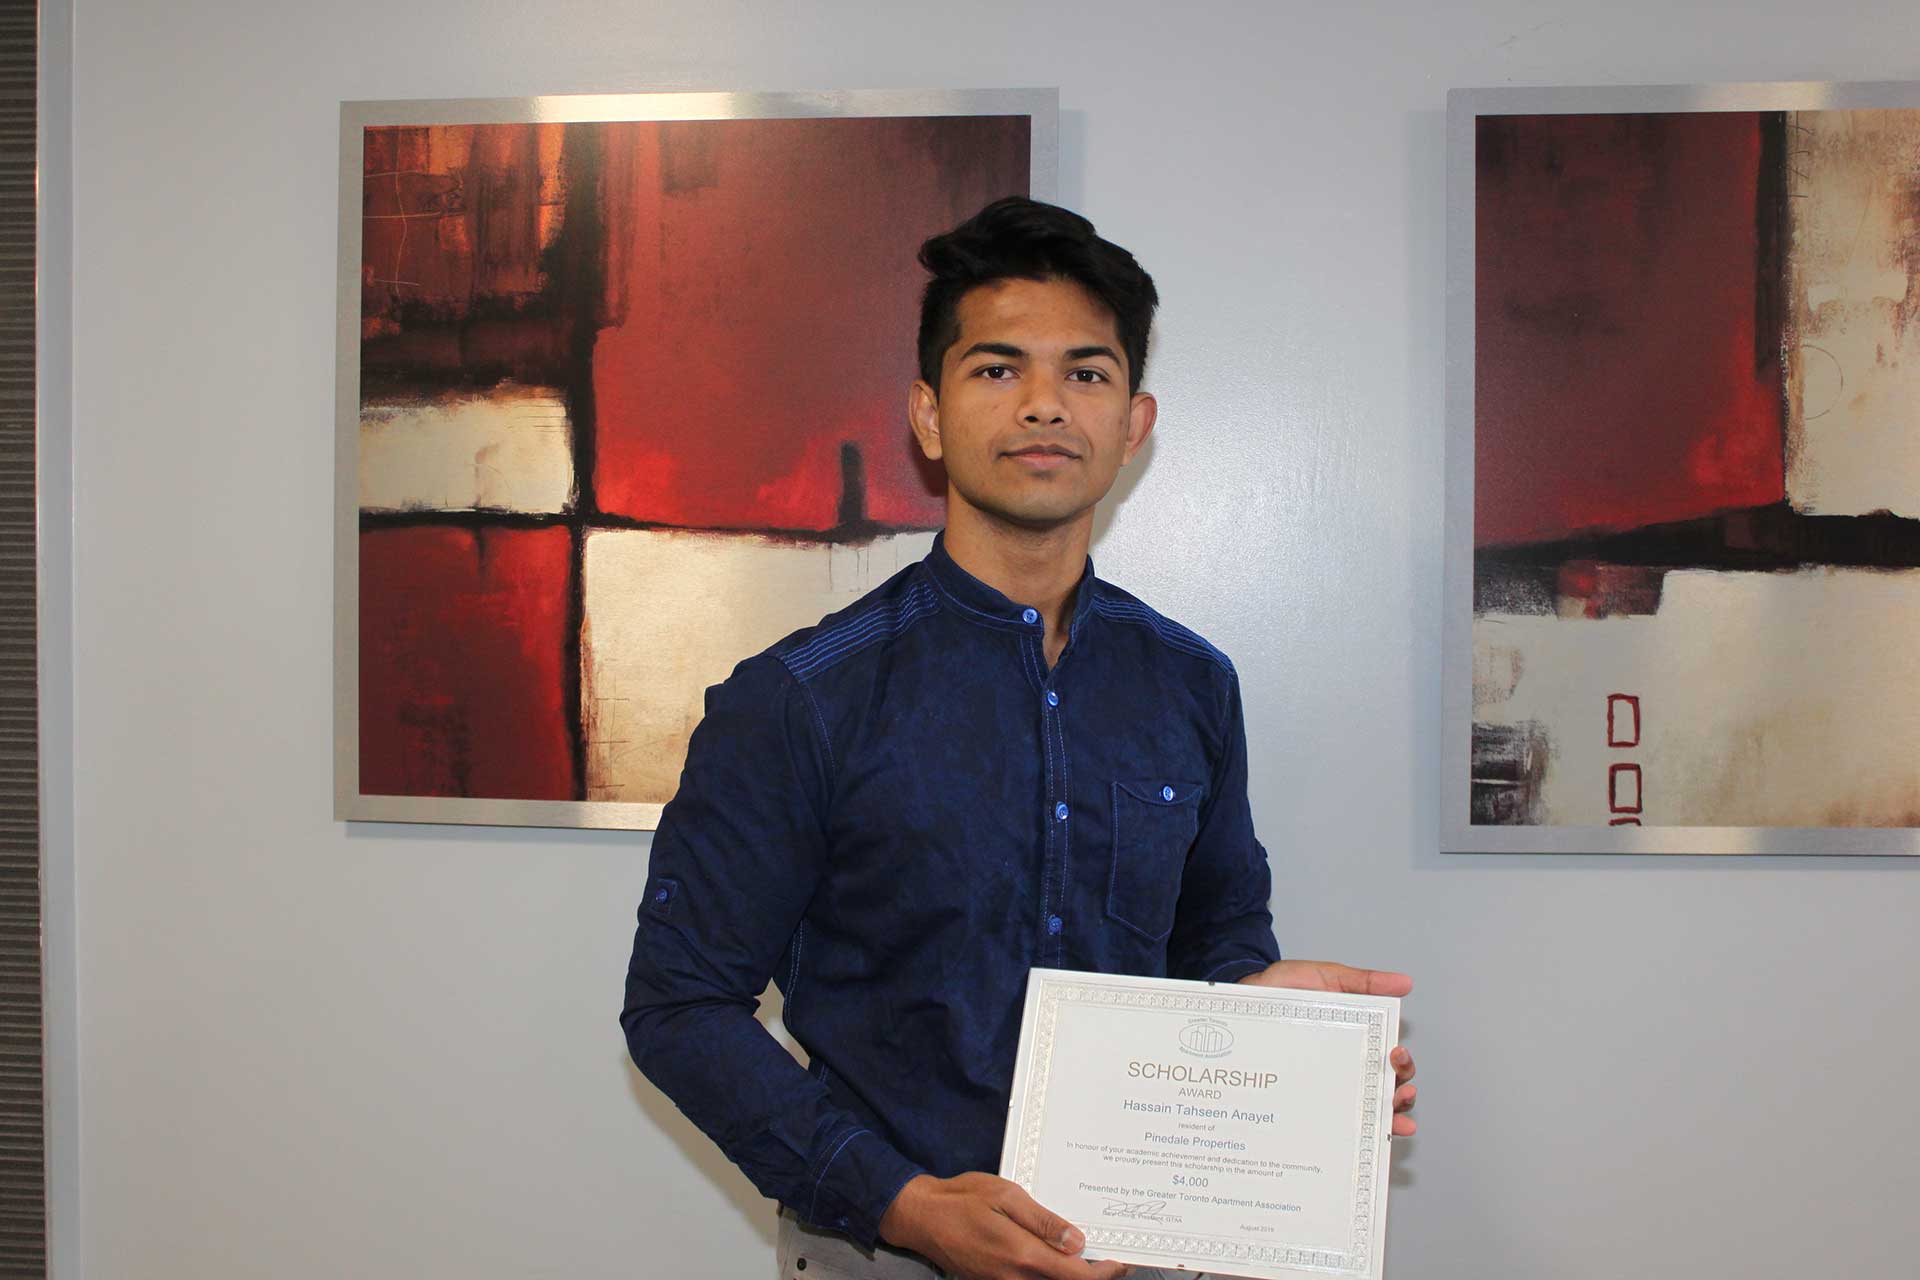 Congratulations to Crescent Town Resident Tahseen on winning the 2019 GTAA Annual Scholarship!